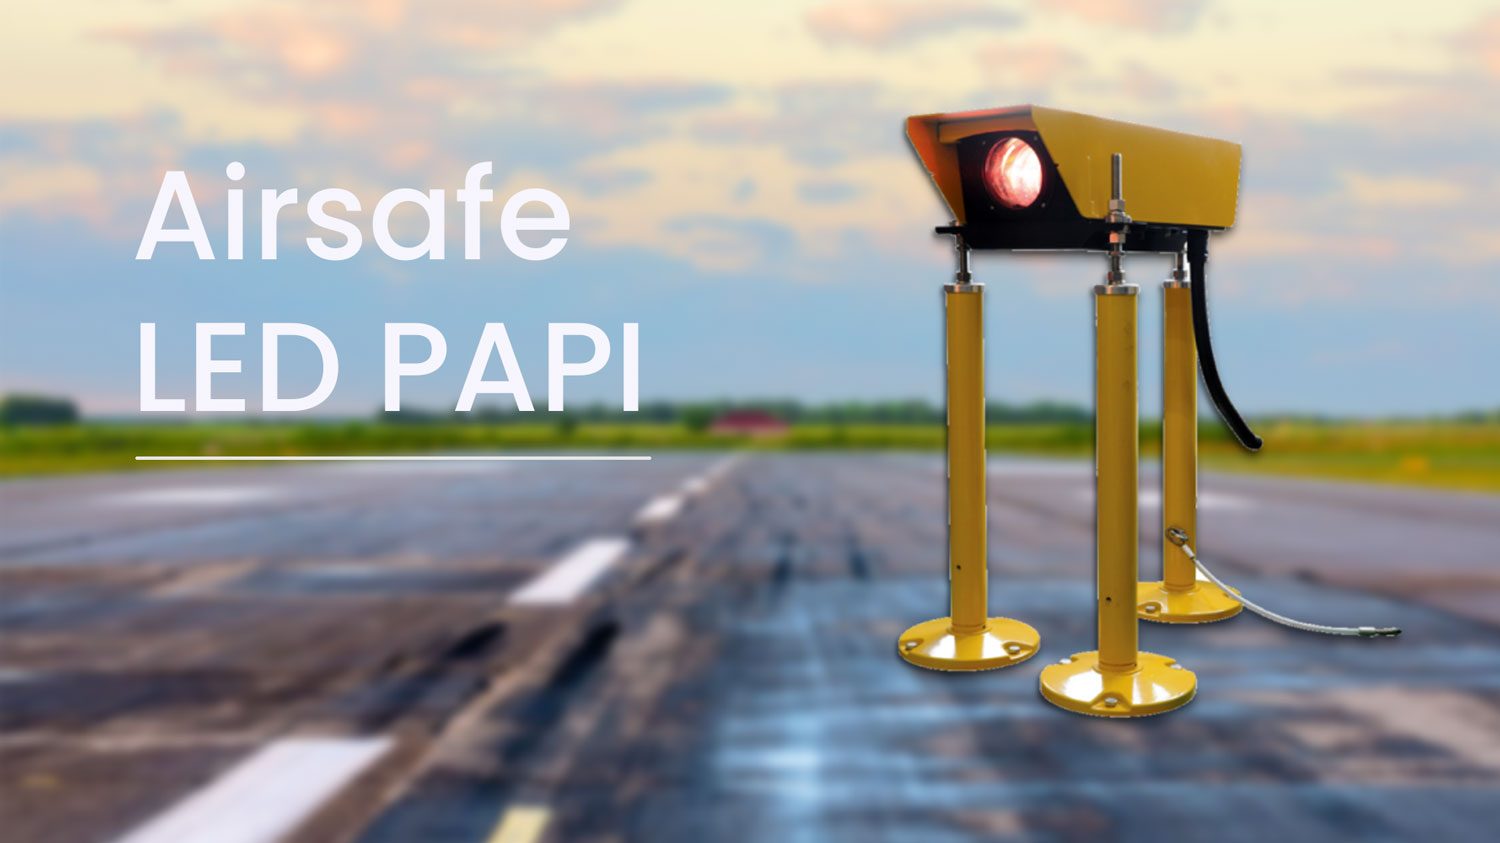 Airsafe-LED-PAPI-approach-operations